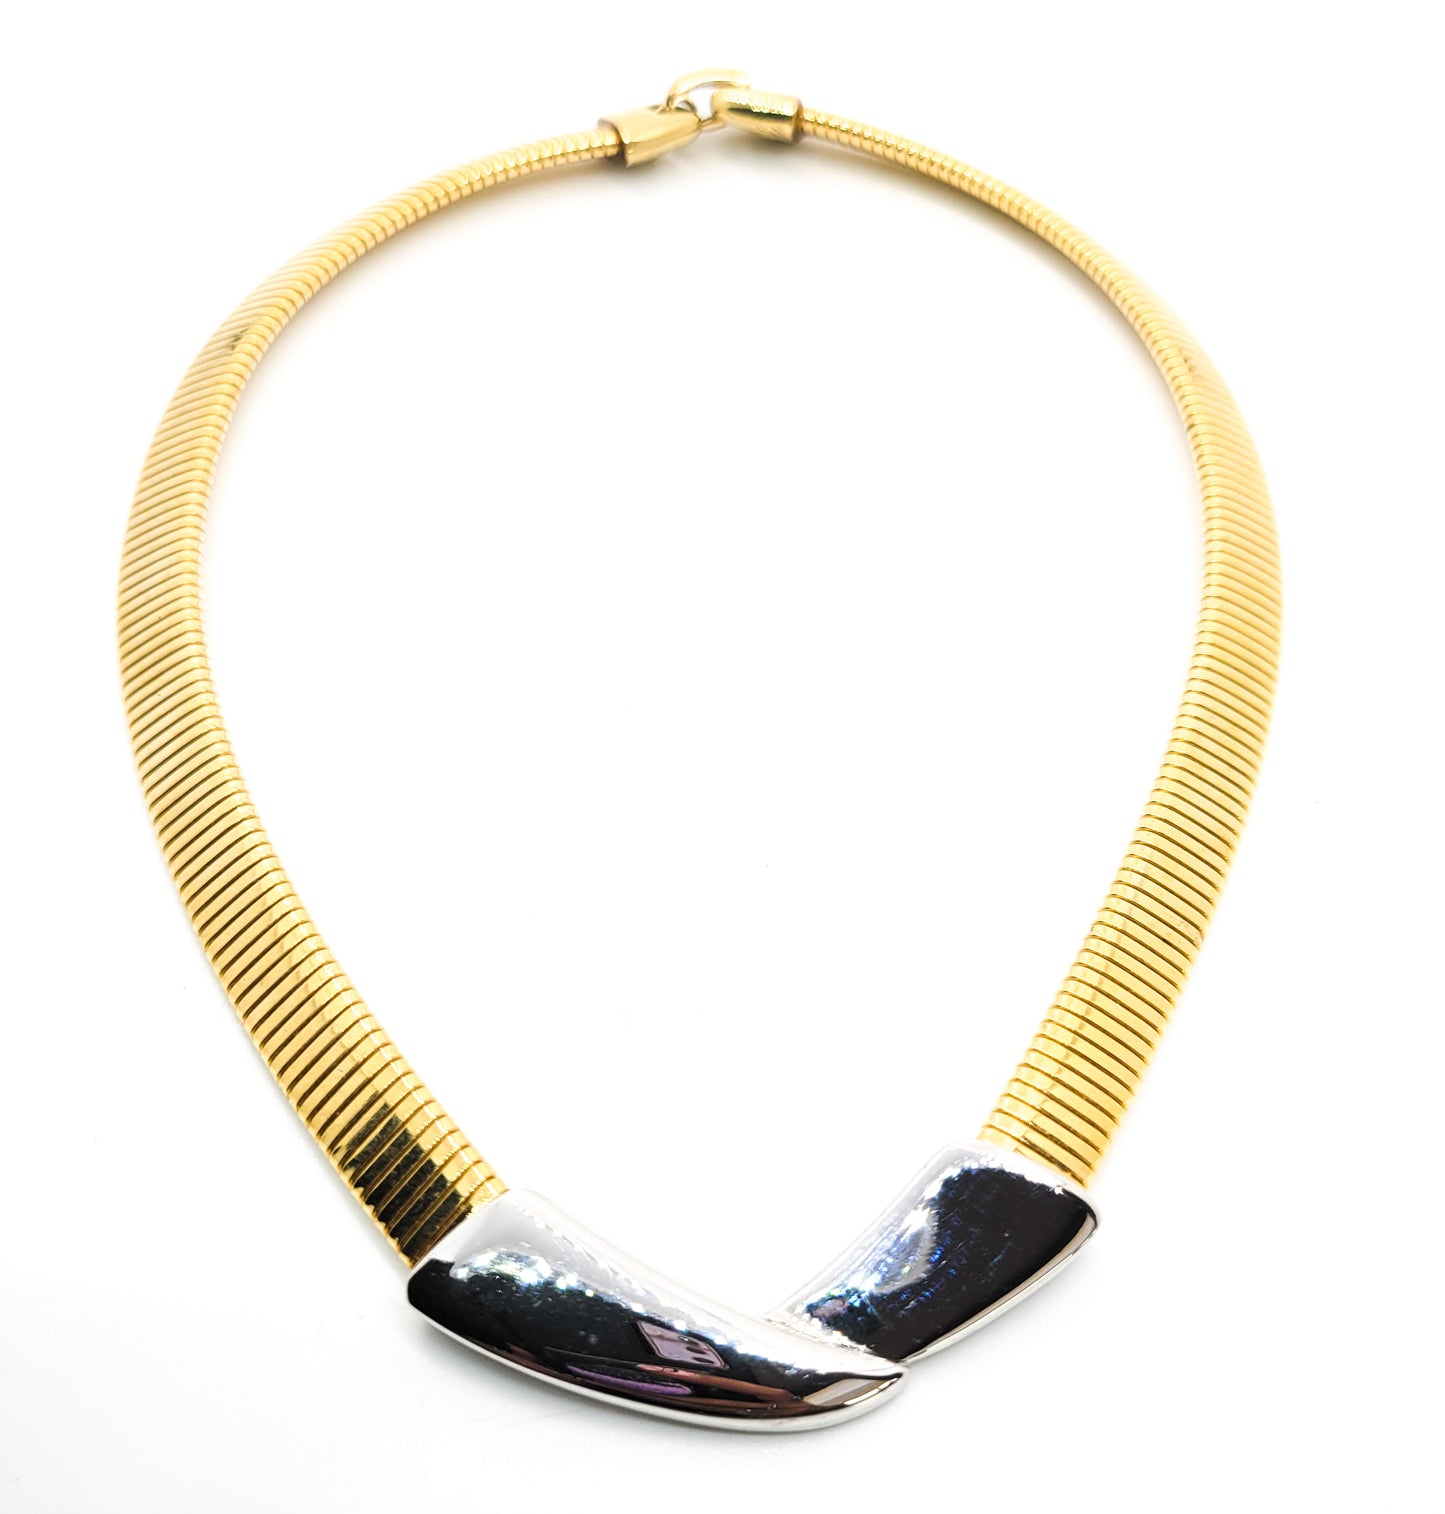 Napier Omega Gold and silver toned retro 80's vintage signed necklace